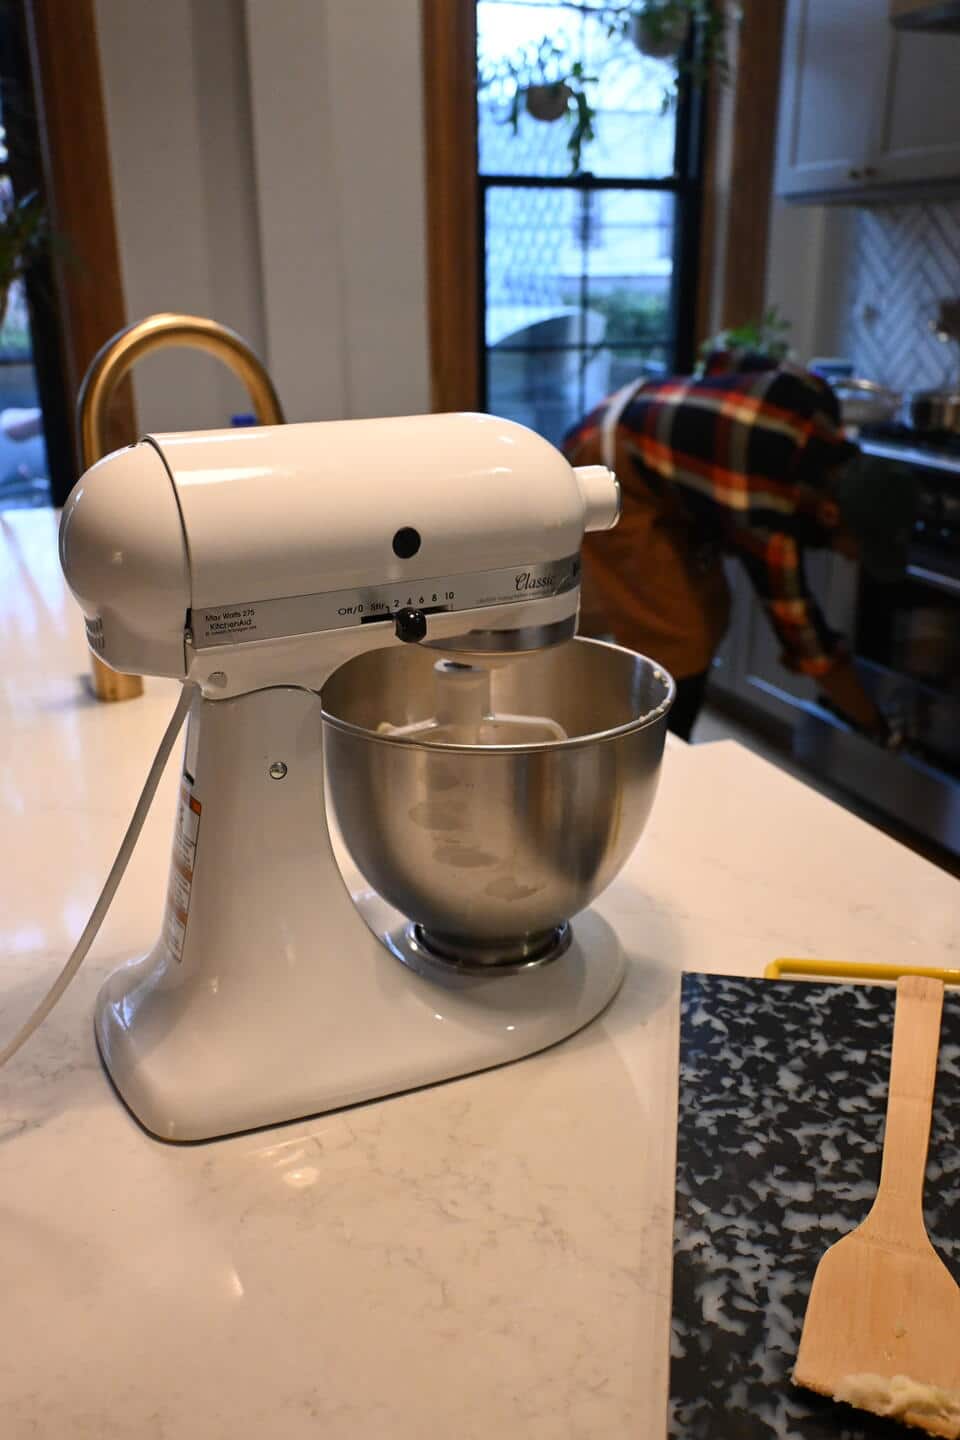 Close-up of a KitchenAid mixer with a person in the background